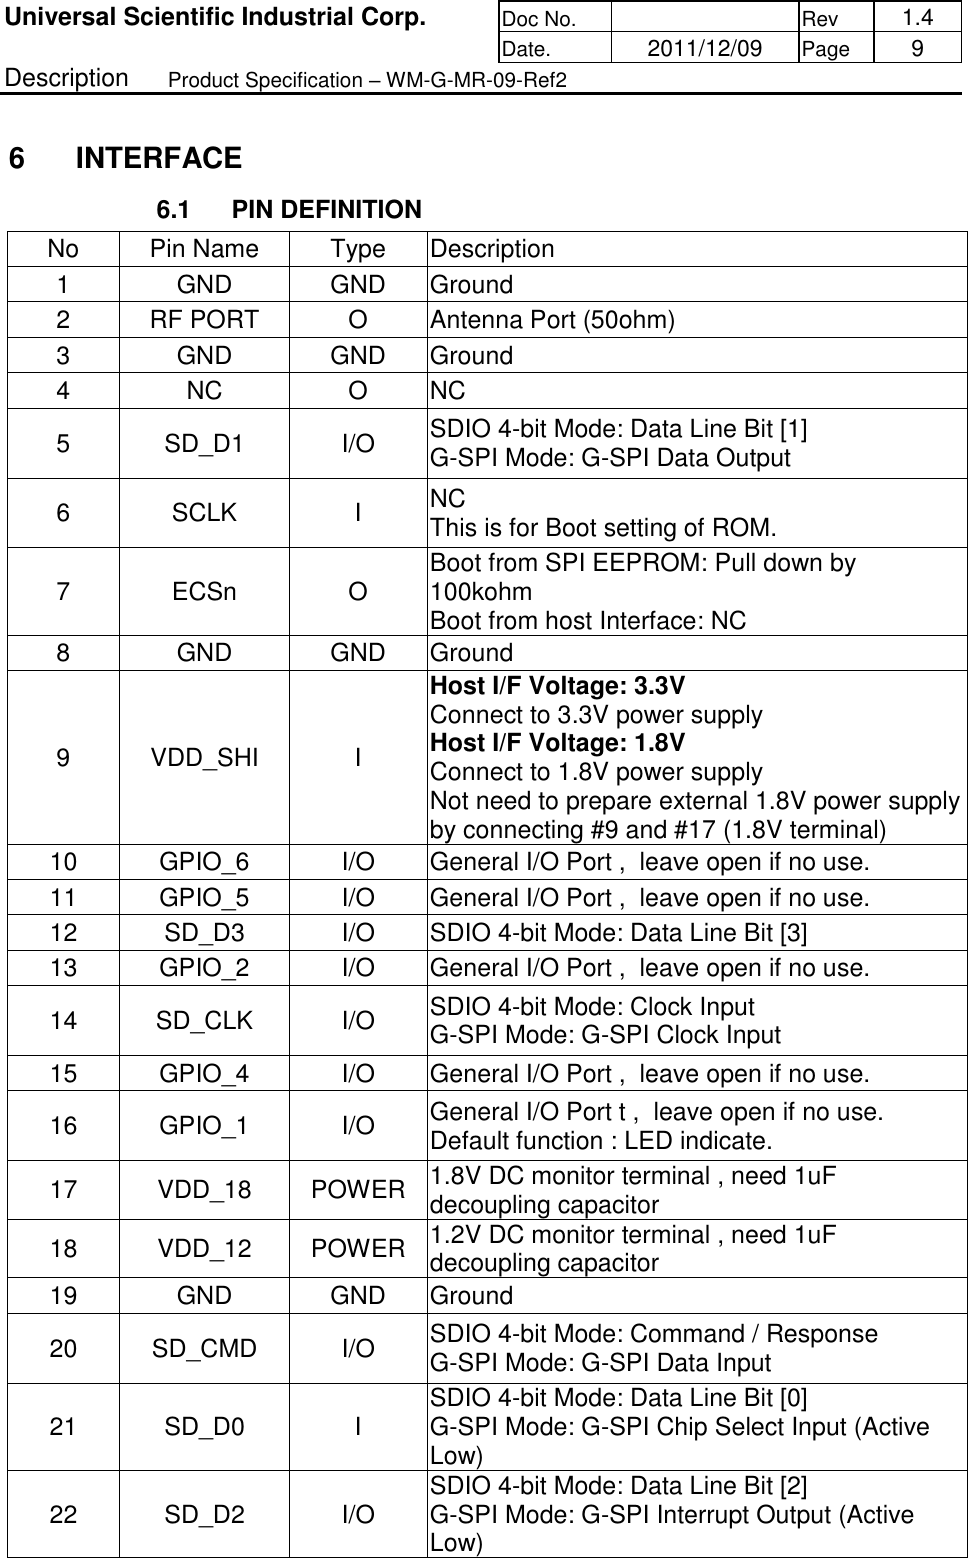 Universal Scientific Industrial Corp. Doc No.  Rev  1.4 Date.  2011/12/09 Page  9 Description  Product Specification – WM-G-MR-09-Ref2 6  INTERFACE 6.1  PIN DEFINITION No  Pin Name  Type  Description 1  GND  GND  Ground 2  RF PORT  O  Antenna Port (50ohm) 3  GND  GND  Ground 4  NC  O  NC 5  SD_D1  I/O SDIO 4-bit Mode: Data Line Bit [1] G-SPI Mode: G-SPI Data Output 6  SCLK  I  NC This is for Boot setting of ROM. 7  ECSn  O  Boot from SPI EEPROM: Pull down by 100kohm Boot from host Interface: NC 8  GND  GND  Ground 9  VDD_SHI  I Host I/F Voltage: 3.3V Connect to 3.3V power supply Host I/F Voltage: 1.8V Connect to 1.8V power supply Not need to prepare external 1.8V power supply by connecting #9 and #17 (1.8V terminal) 10  GPIO_6  I/O  General I/O Port ,  leave open if no use. 11  GPIO_5  I/O  General I/O Port ,  leave open if no use. 12  SD_D3  I/O  SDIO 4-bit Mode: Data Line Bit [3] 13  GPIO_2  I/O  General I/O Port ,  leave open if no use. 14  SD_CLK  I/O SDIO 4-bit Mode: Clock Input G-SPI Mode: G-SPI Clock Input 15  GPIO_4  I/O  General I/O Port ,  leave open if no use. 16  GPIO_1  I/O General I/O Port t ,  leave open if no use. Default function : LED indicate. 17  VDD_18  POWER  1.8V DC monitor terminal , need 1uF decoupling capacitor 18  VDD_12  POWER  1.2V DC monitor terminal , need 1uF decoupling capacitor 19  GND  GND  Ground 20  SD_CMD  I/O SDIO 4-bit Mode: Command / Response G-SPI Mode: G-SPI Data Input 21  SD_D0  I  SDIO 4-bit Mode: Data Line Bit [0] G-SPI Mode: G-SPI Chip Select Input (Active Low) 22  SD_D2  I/O SDIO 4-bit Mode: Data Line Bit [2] G-SPI Mode: G-SPI Interrupt Output (Active Low) 